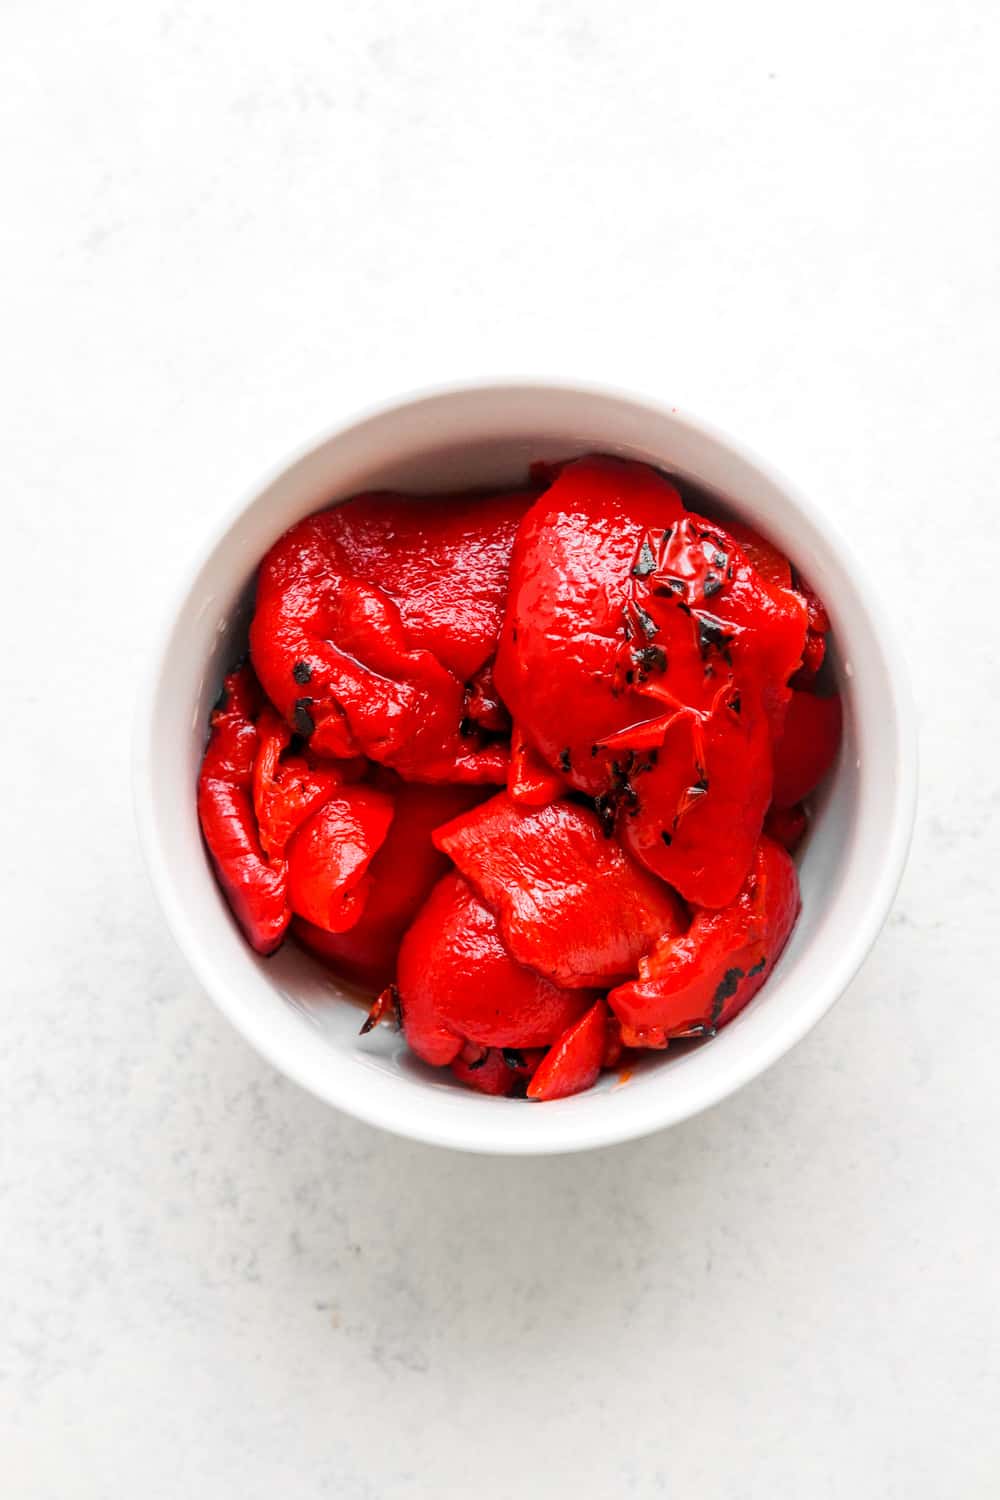 Roasted red peppers in a round white bowl on a white surface